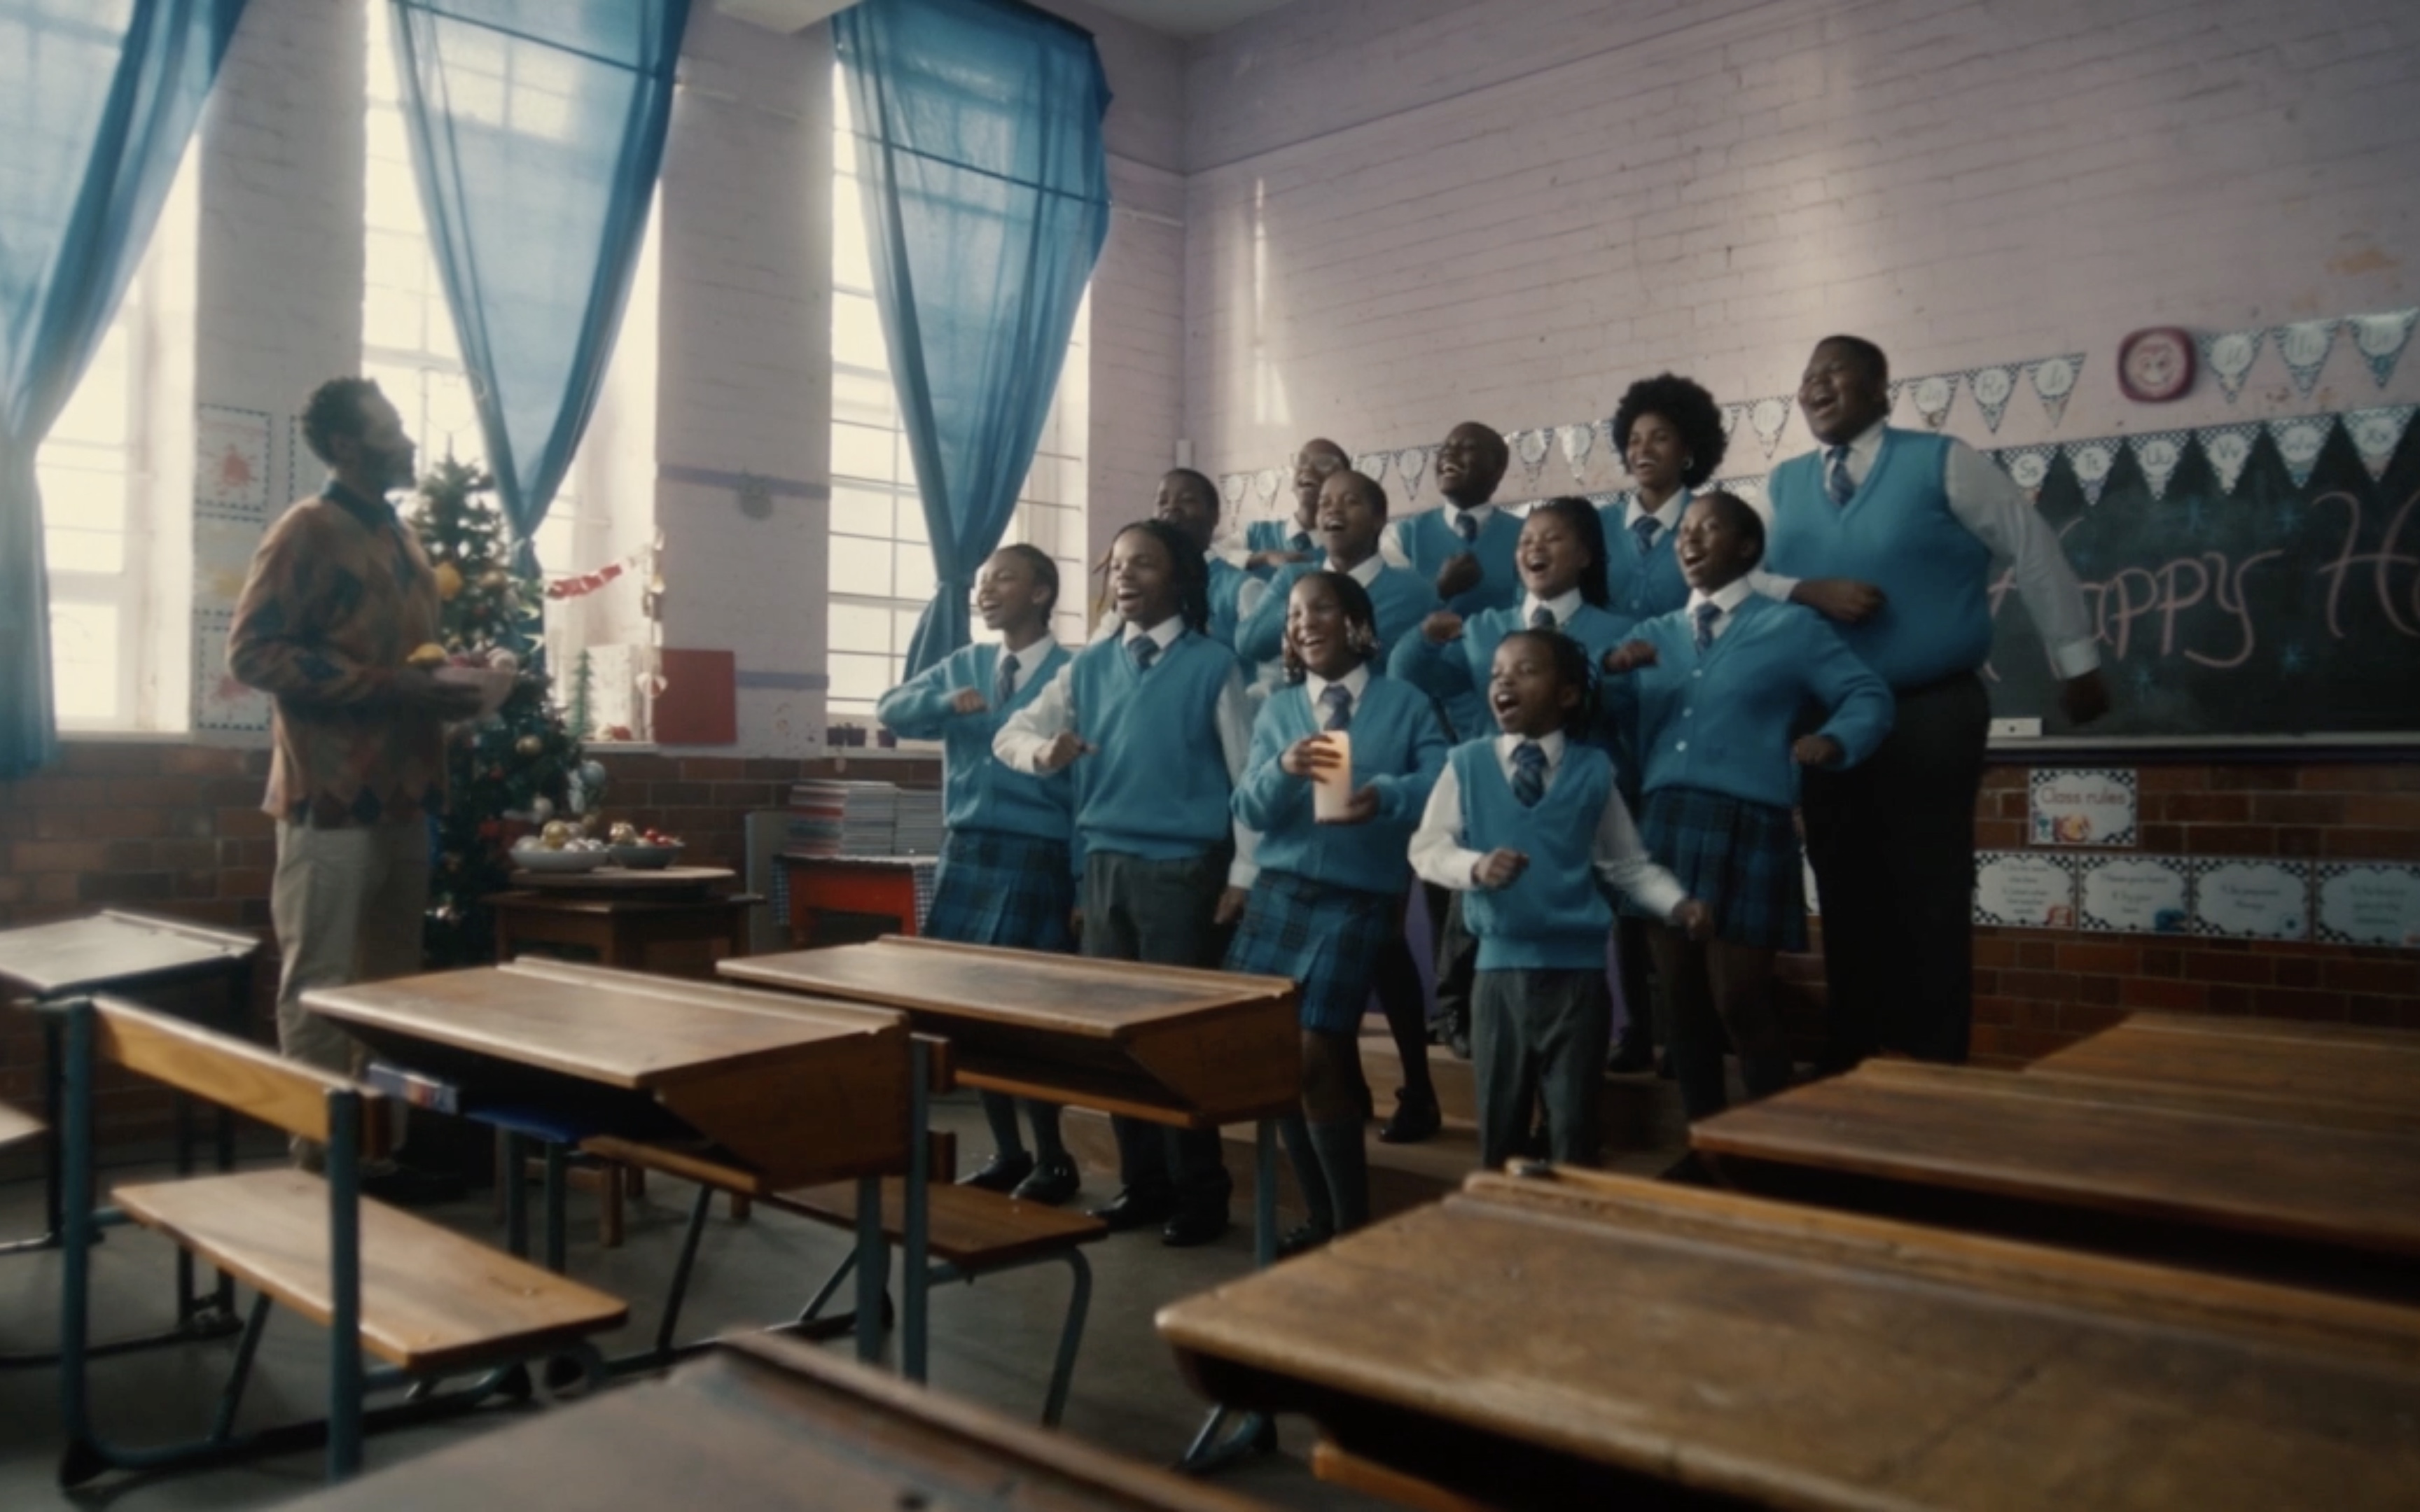 Watch: Disney's Heartwarming "A Wish For The Holidays" Ad Unites the World